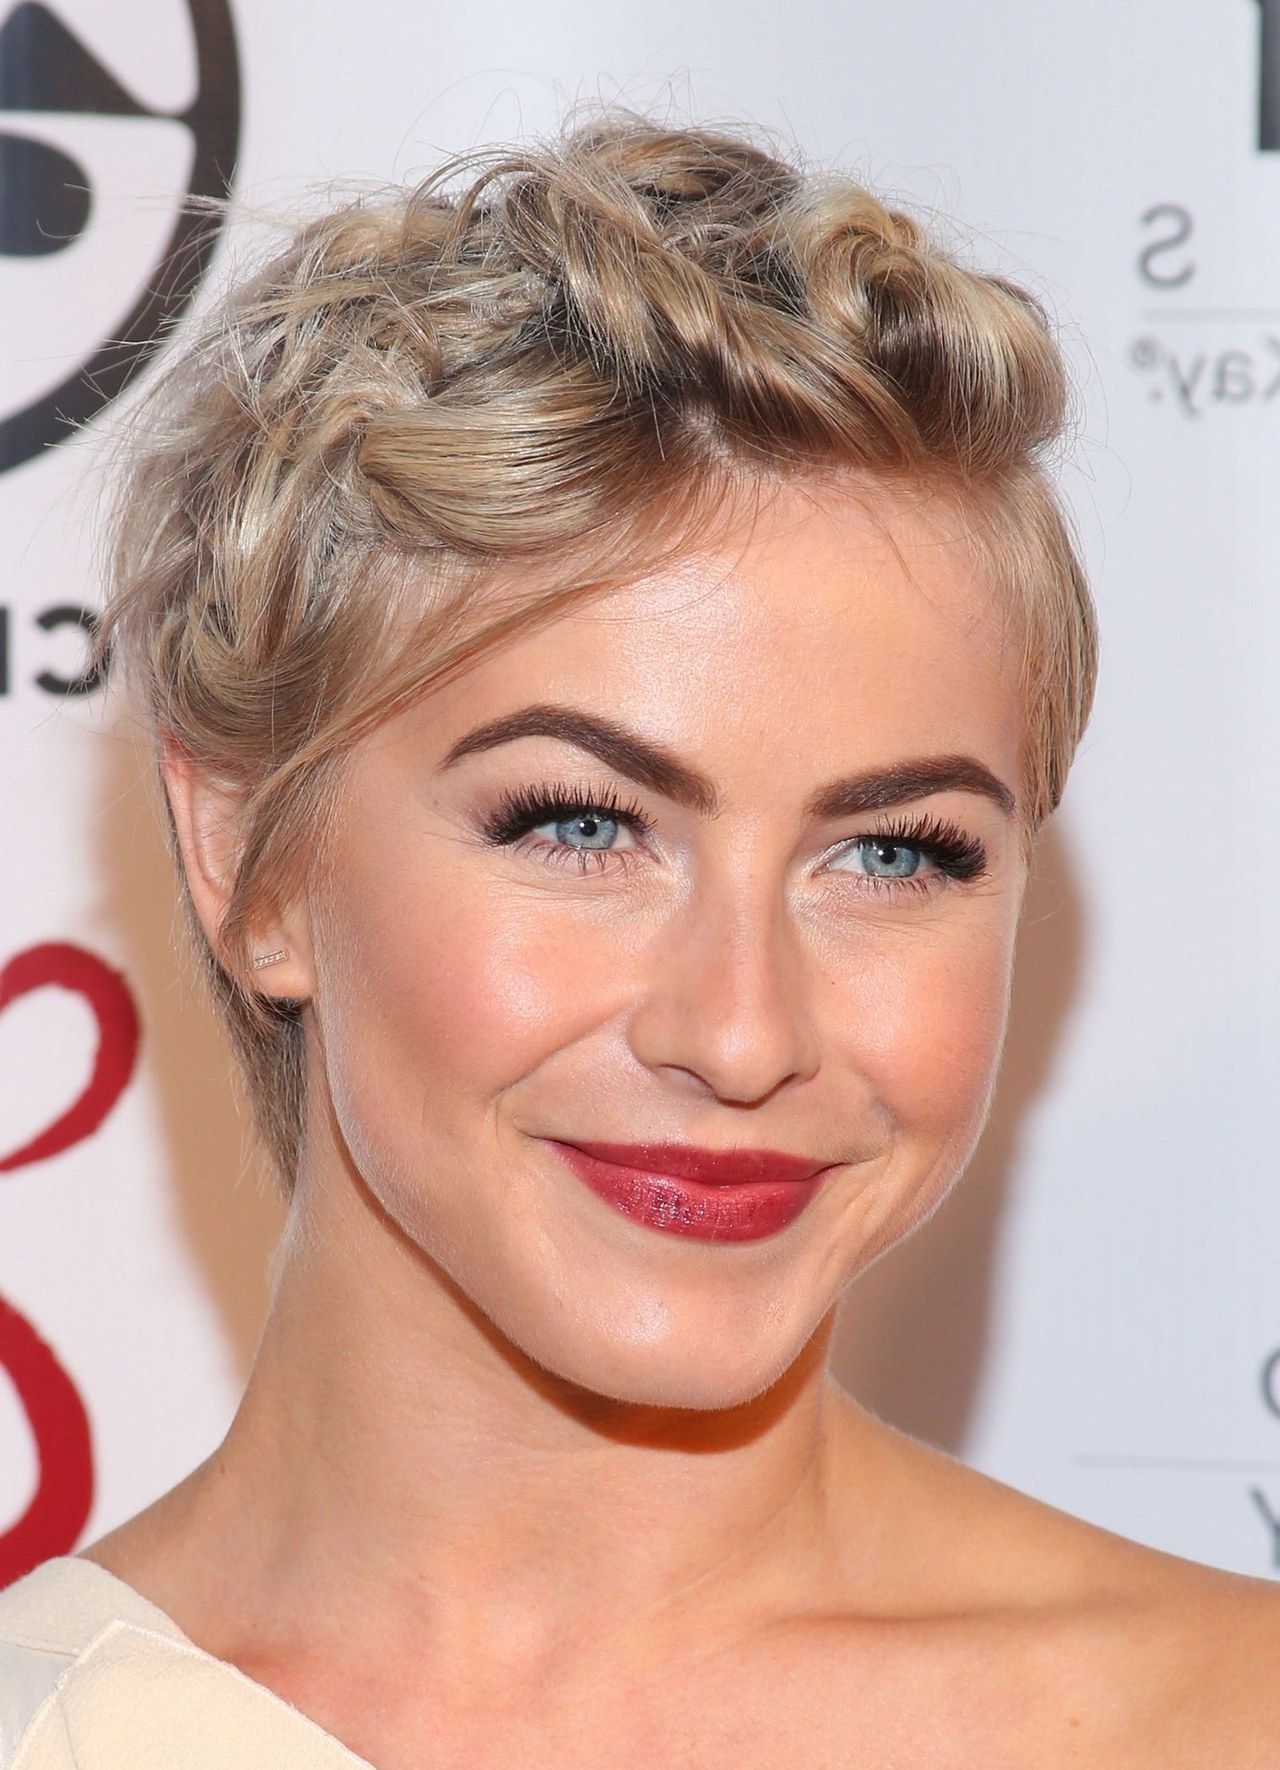 Julianne Hough Shows A Cute Hairstyle Option For Short Hair For Within Julianne Ho Hairstylesugh Updo Hairstyles (View 6 of 15)